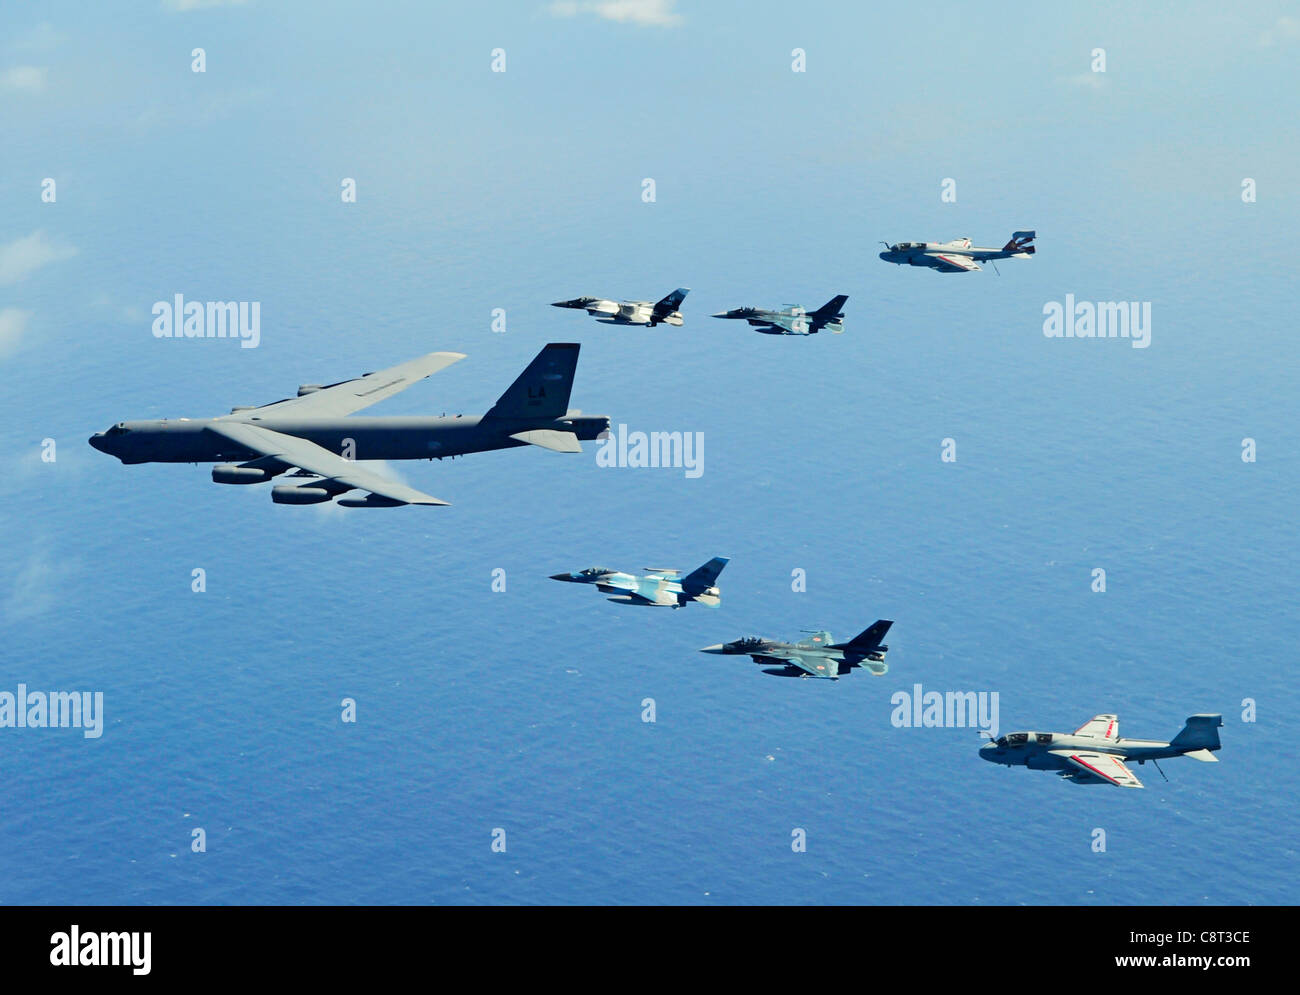 A B-52 Stratofortress leads a formation of two F-16 Fighting Falcons; two Japan Air Self-Defense Force F-2 attack fighters and two U.S. Navy EA-6B Prowlers Feb. 15, 2010 near Guam during Exercise Cope North. Stock Photo